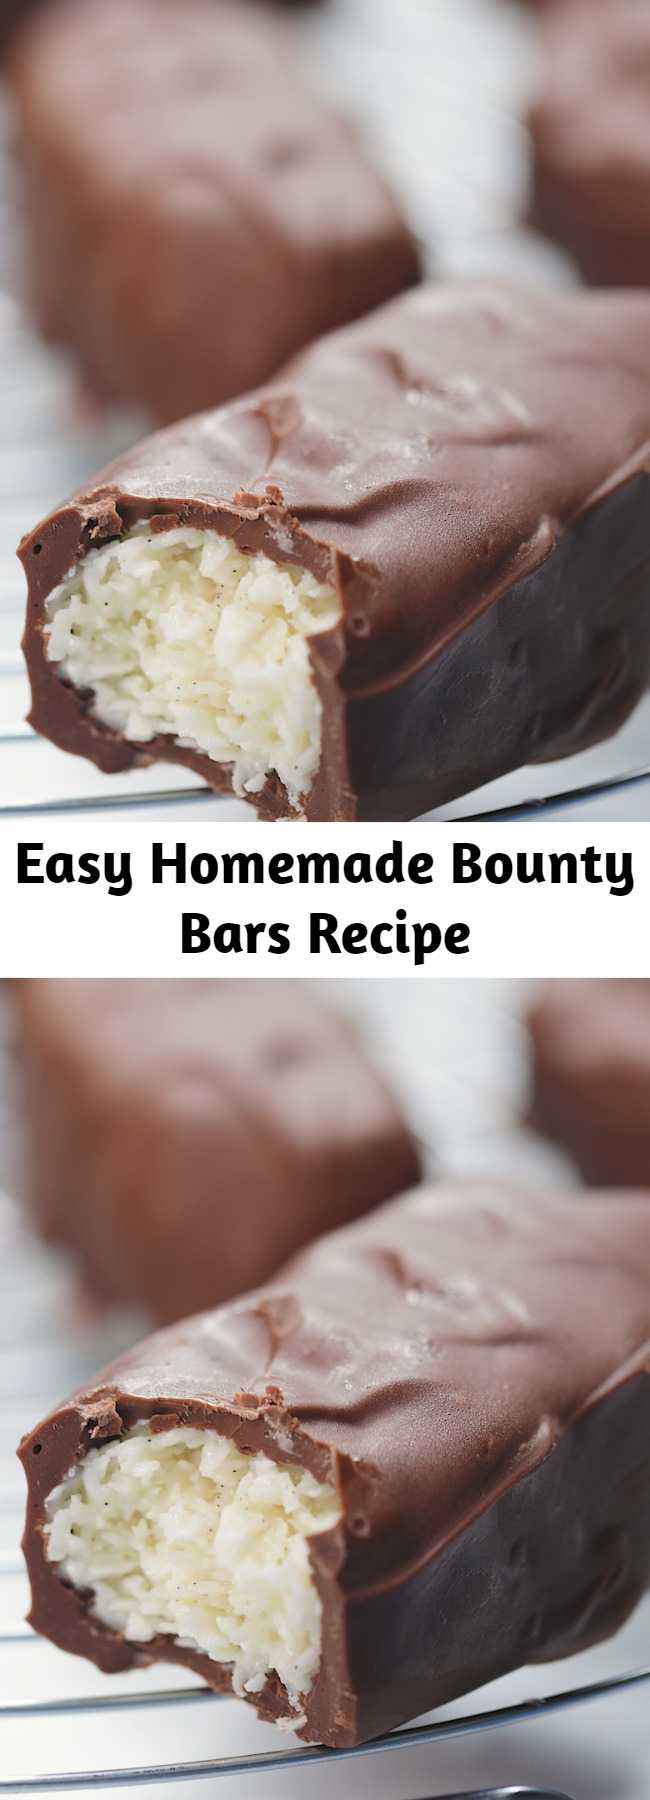 Easy Homemade Bounty Bars Recipe - These homemade Bounty bars are almost as good as the real thing! super easy to make with only a few ingredients! Perfect for kids parties or a cheeky chocolate hit.